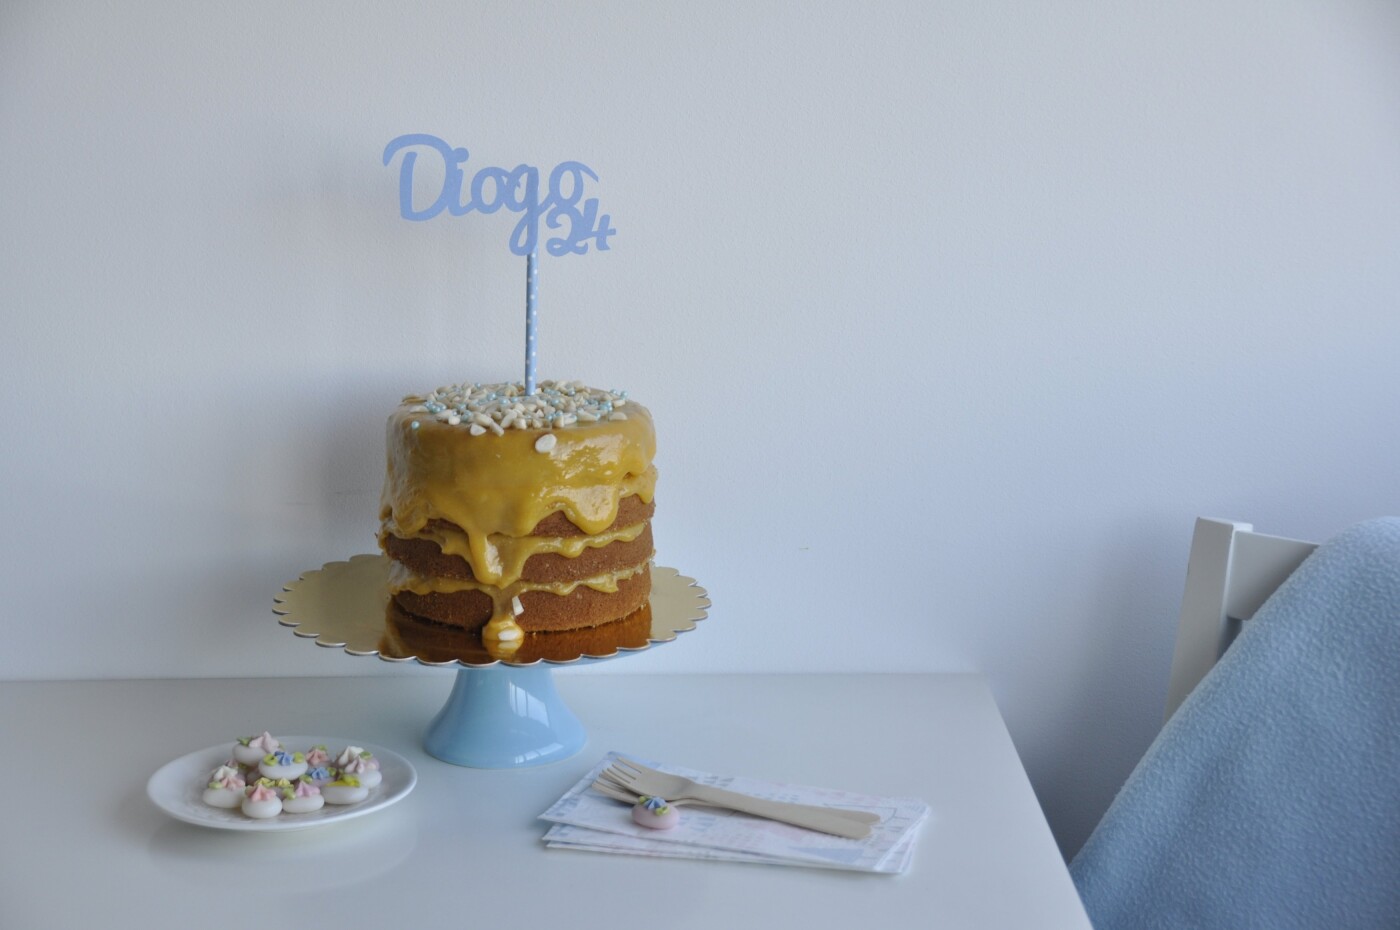 I have baked this cake for a dear friend, whose stepson turned 24 earlier this year. This is a vanilla cake with egg cream, which is a Portuguese traditional filling, with sliced almonds on top. I have made the customized cake topper and coordinated the colors in the photo to match its soft blue.